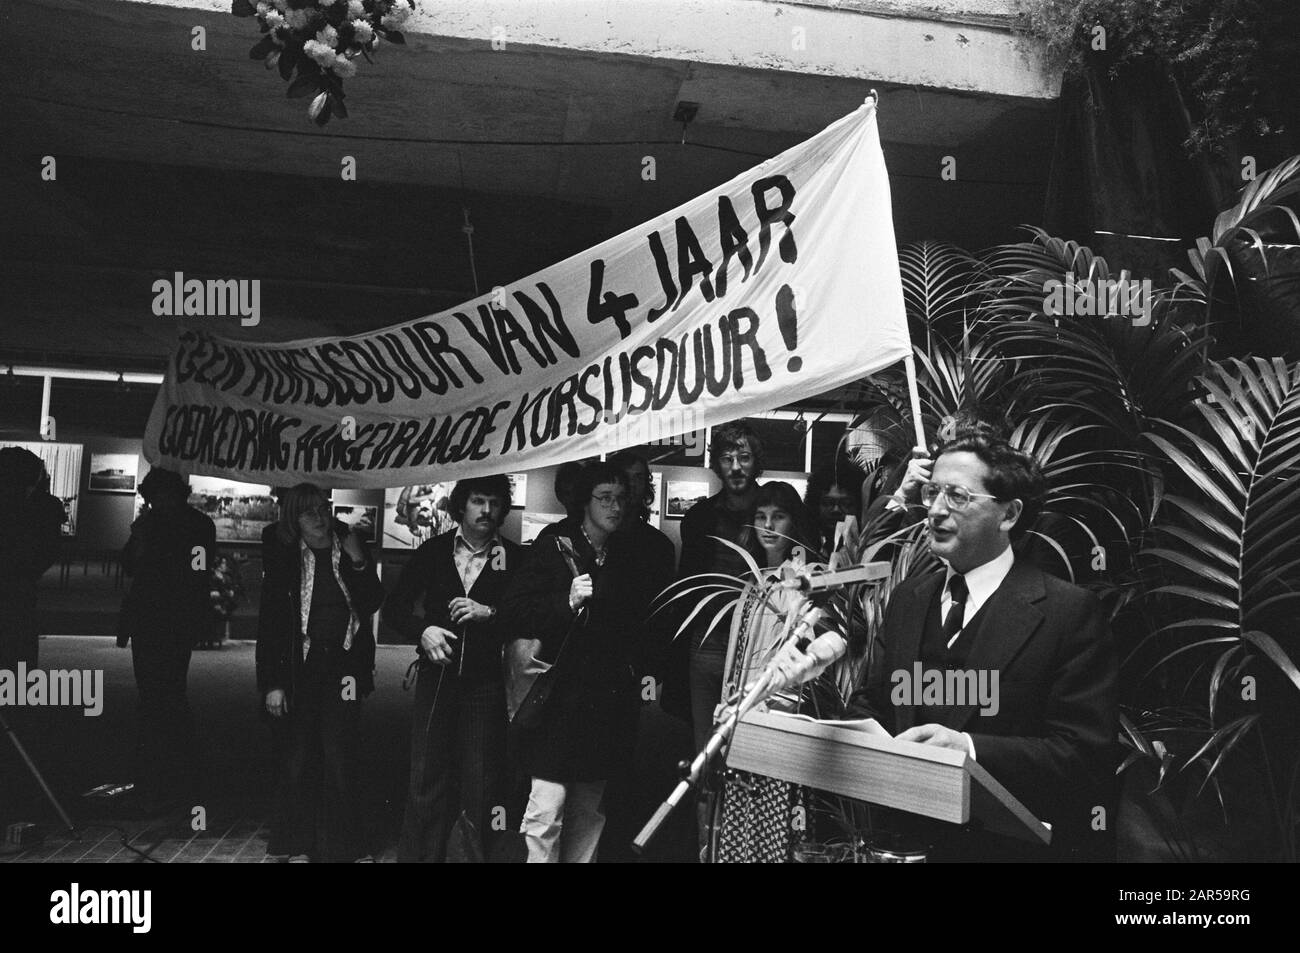 Highest point reached at construction Academic Hospital in Bijlmermeer; protest at opening speech Pais (r) Date: September 21, 1978 Keywords: protests, hospitals Institution name: Academic Hospital Stock Photo